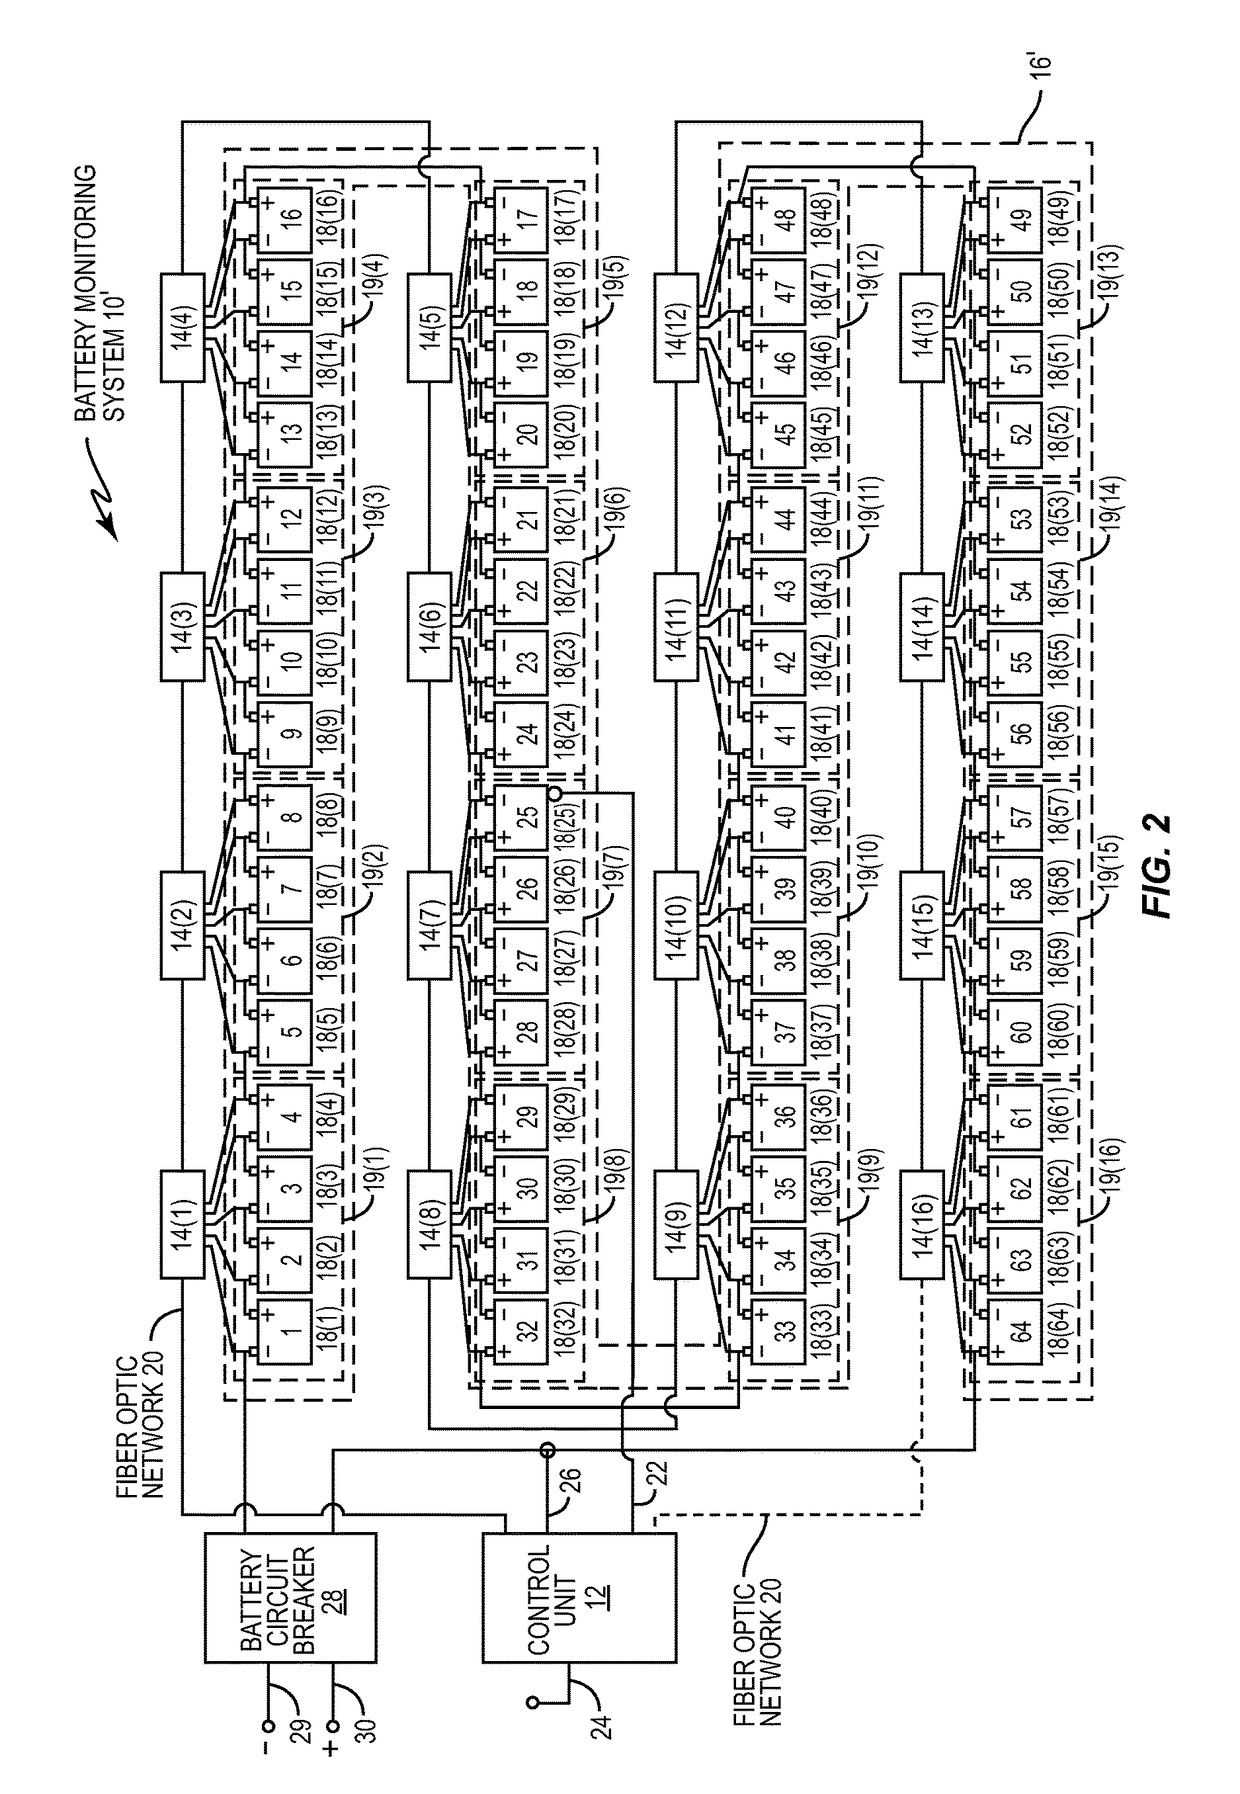 Non-sequential monitoring of battery cells in battery monitoring systems, and related components, systems, and methods